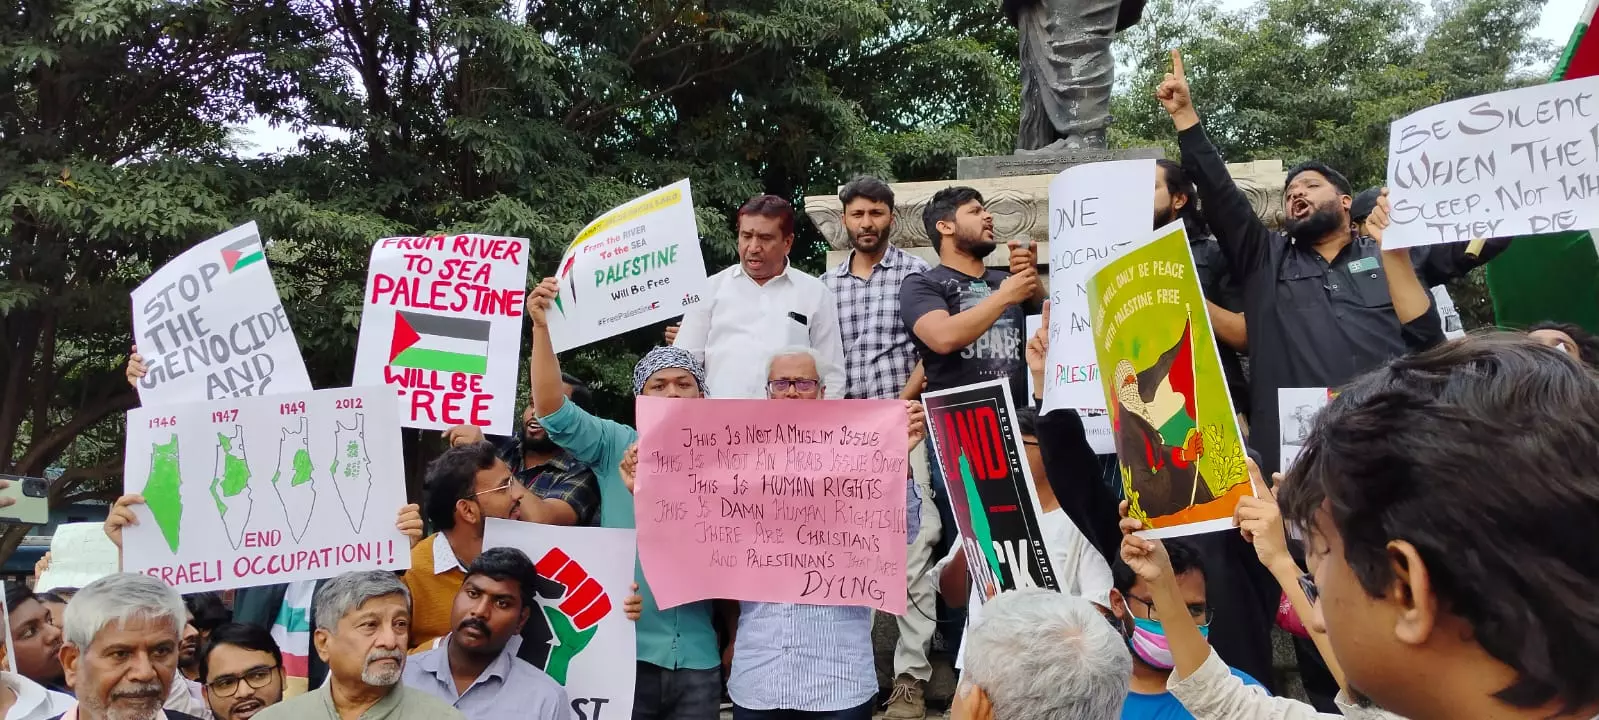 Karnataka now greenlights pro-Palestine protests but activists remain sceptical